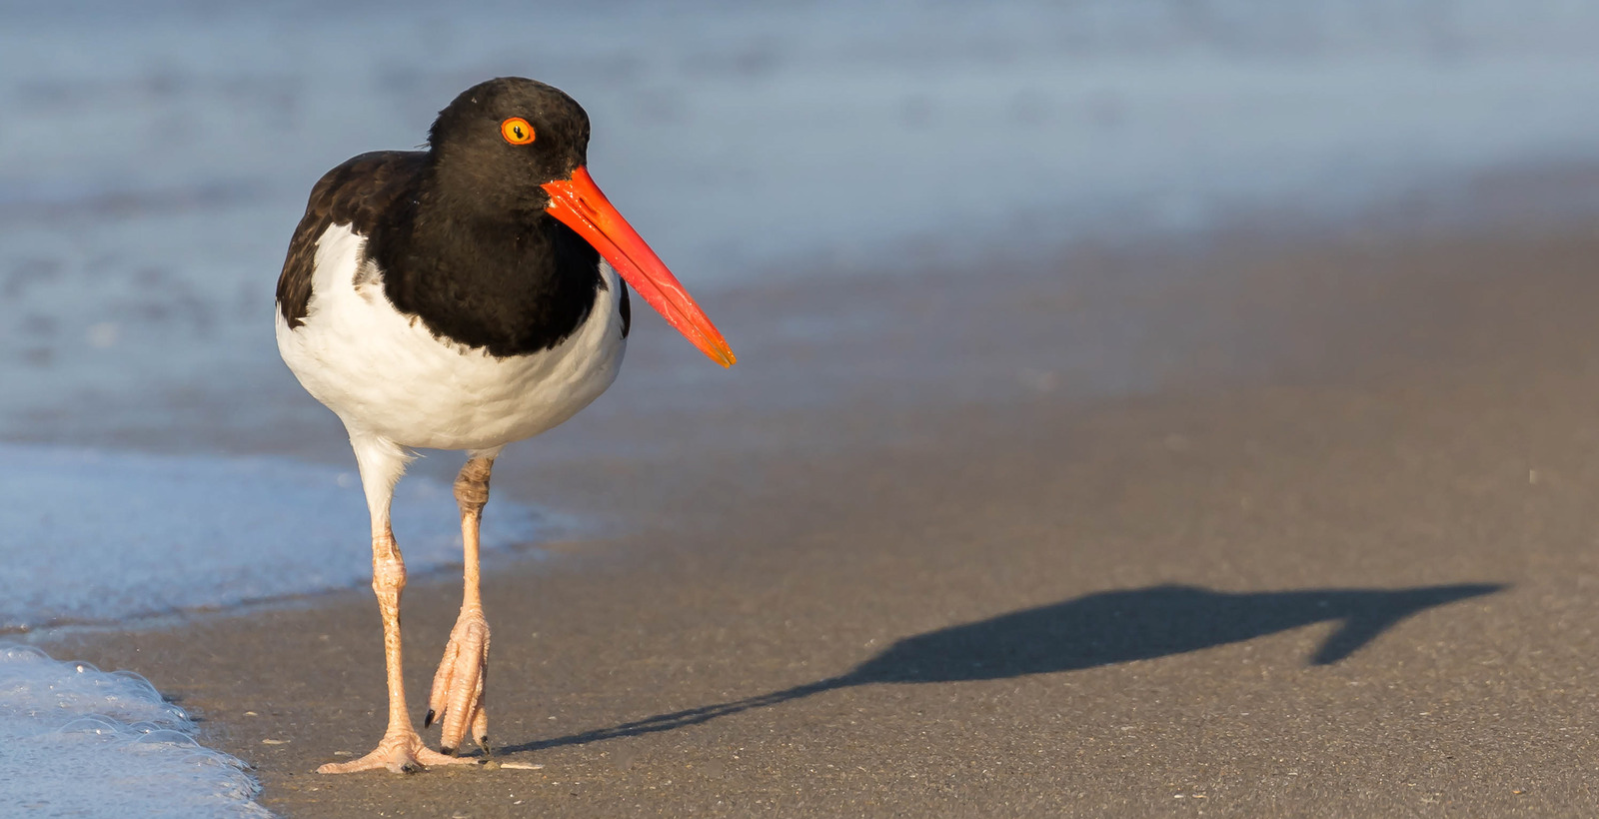 An American Oystercatcher walks on the sandy shore with the tide lapping up on the left side of the photo.